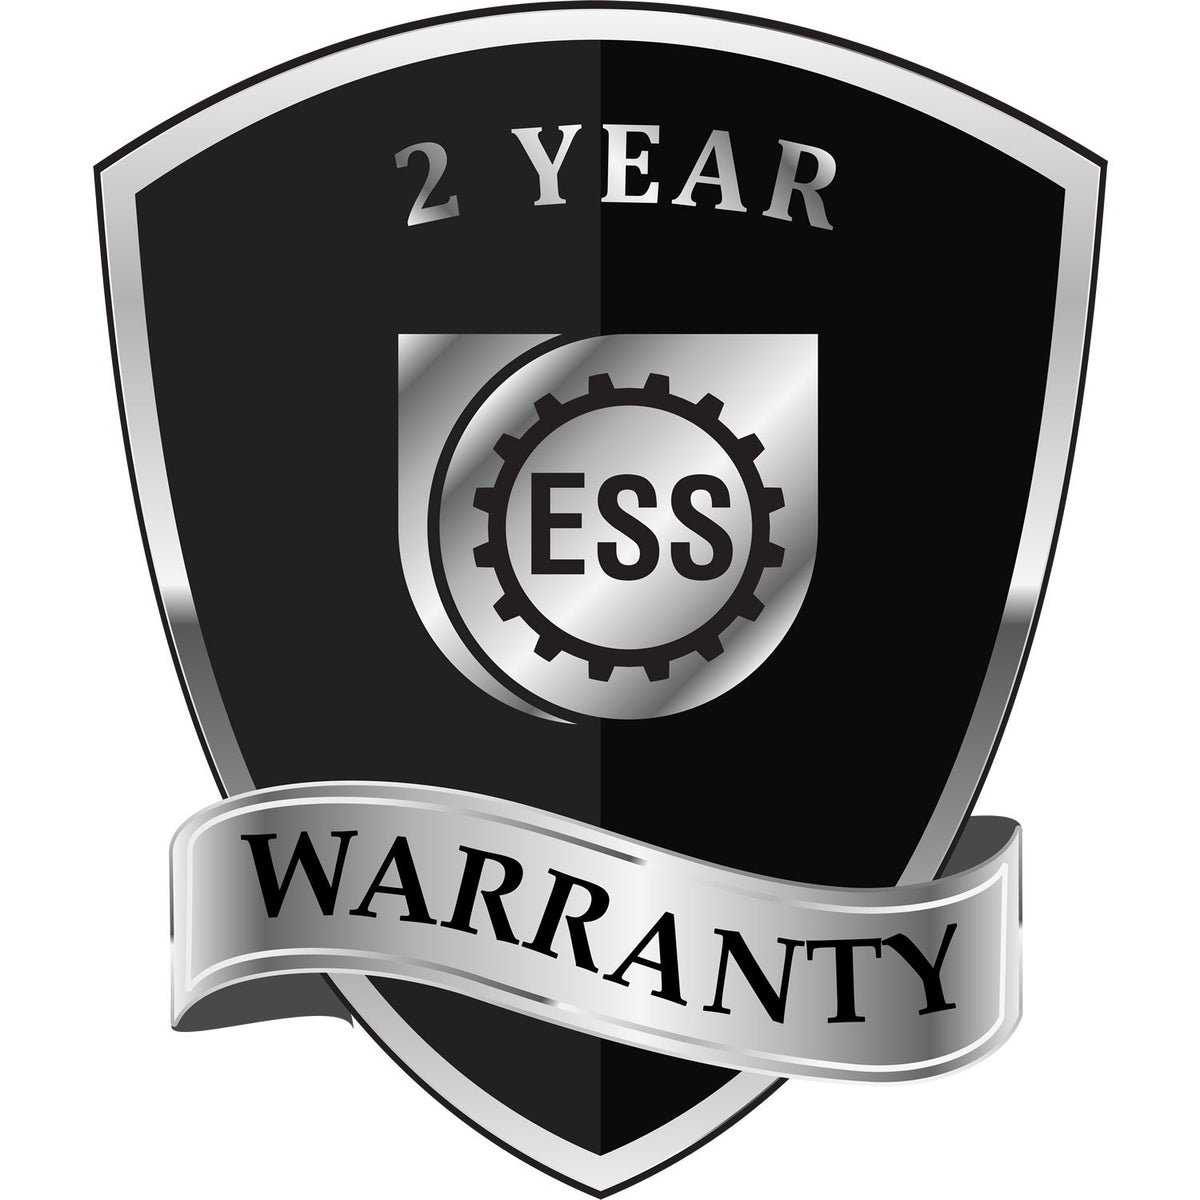 A black and silver badge or emblem showing warranty information for the Long Reach Pennsylvania Geology Seal